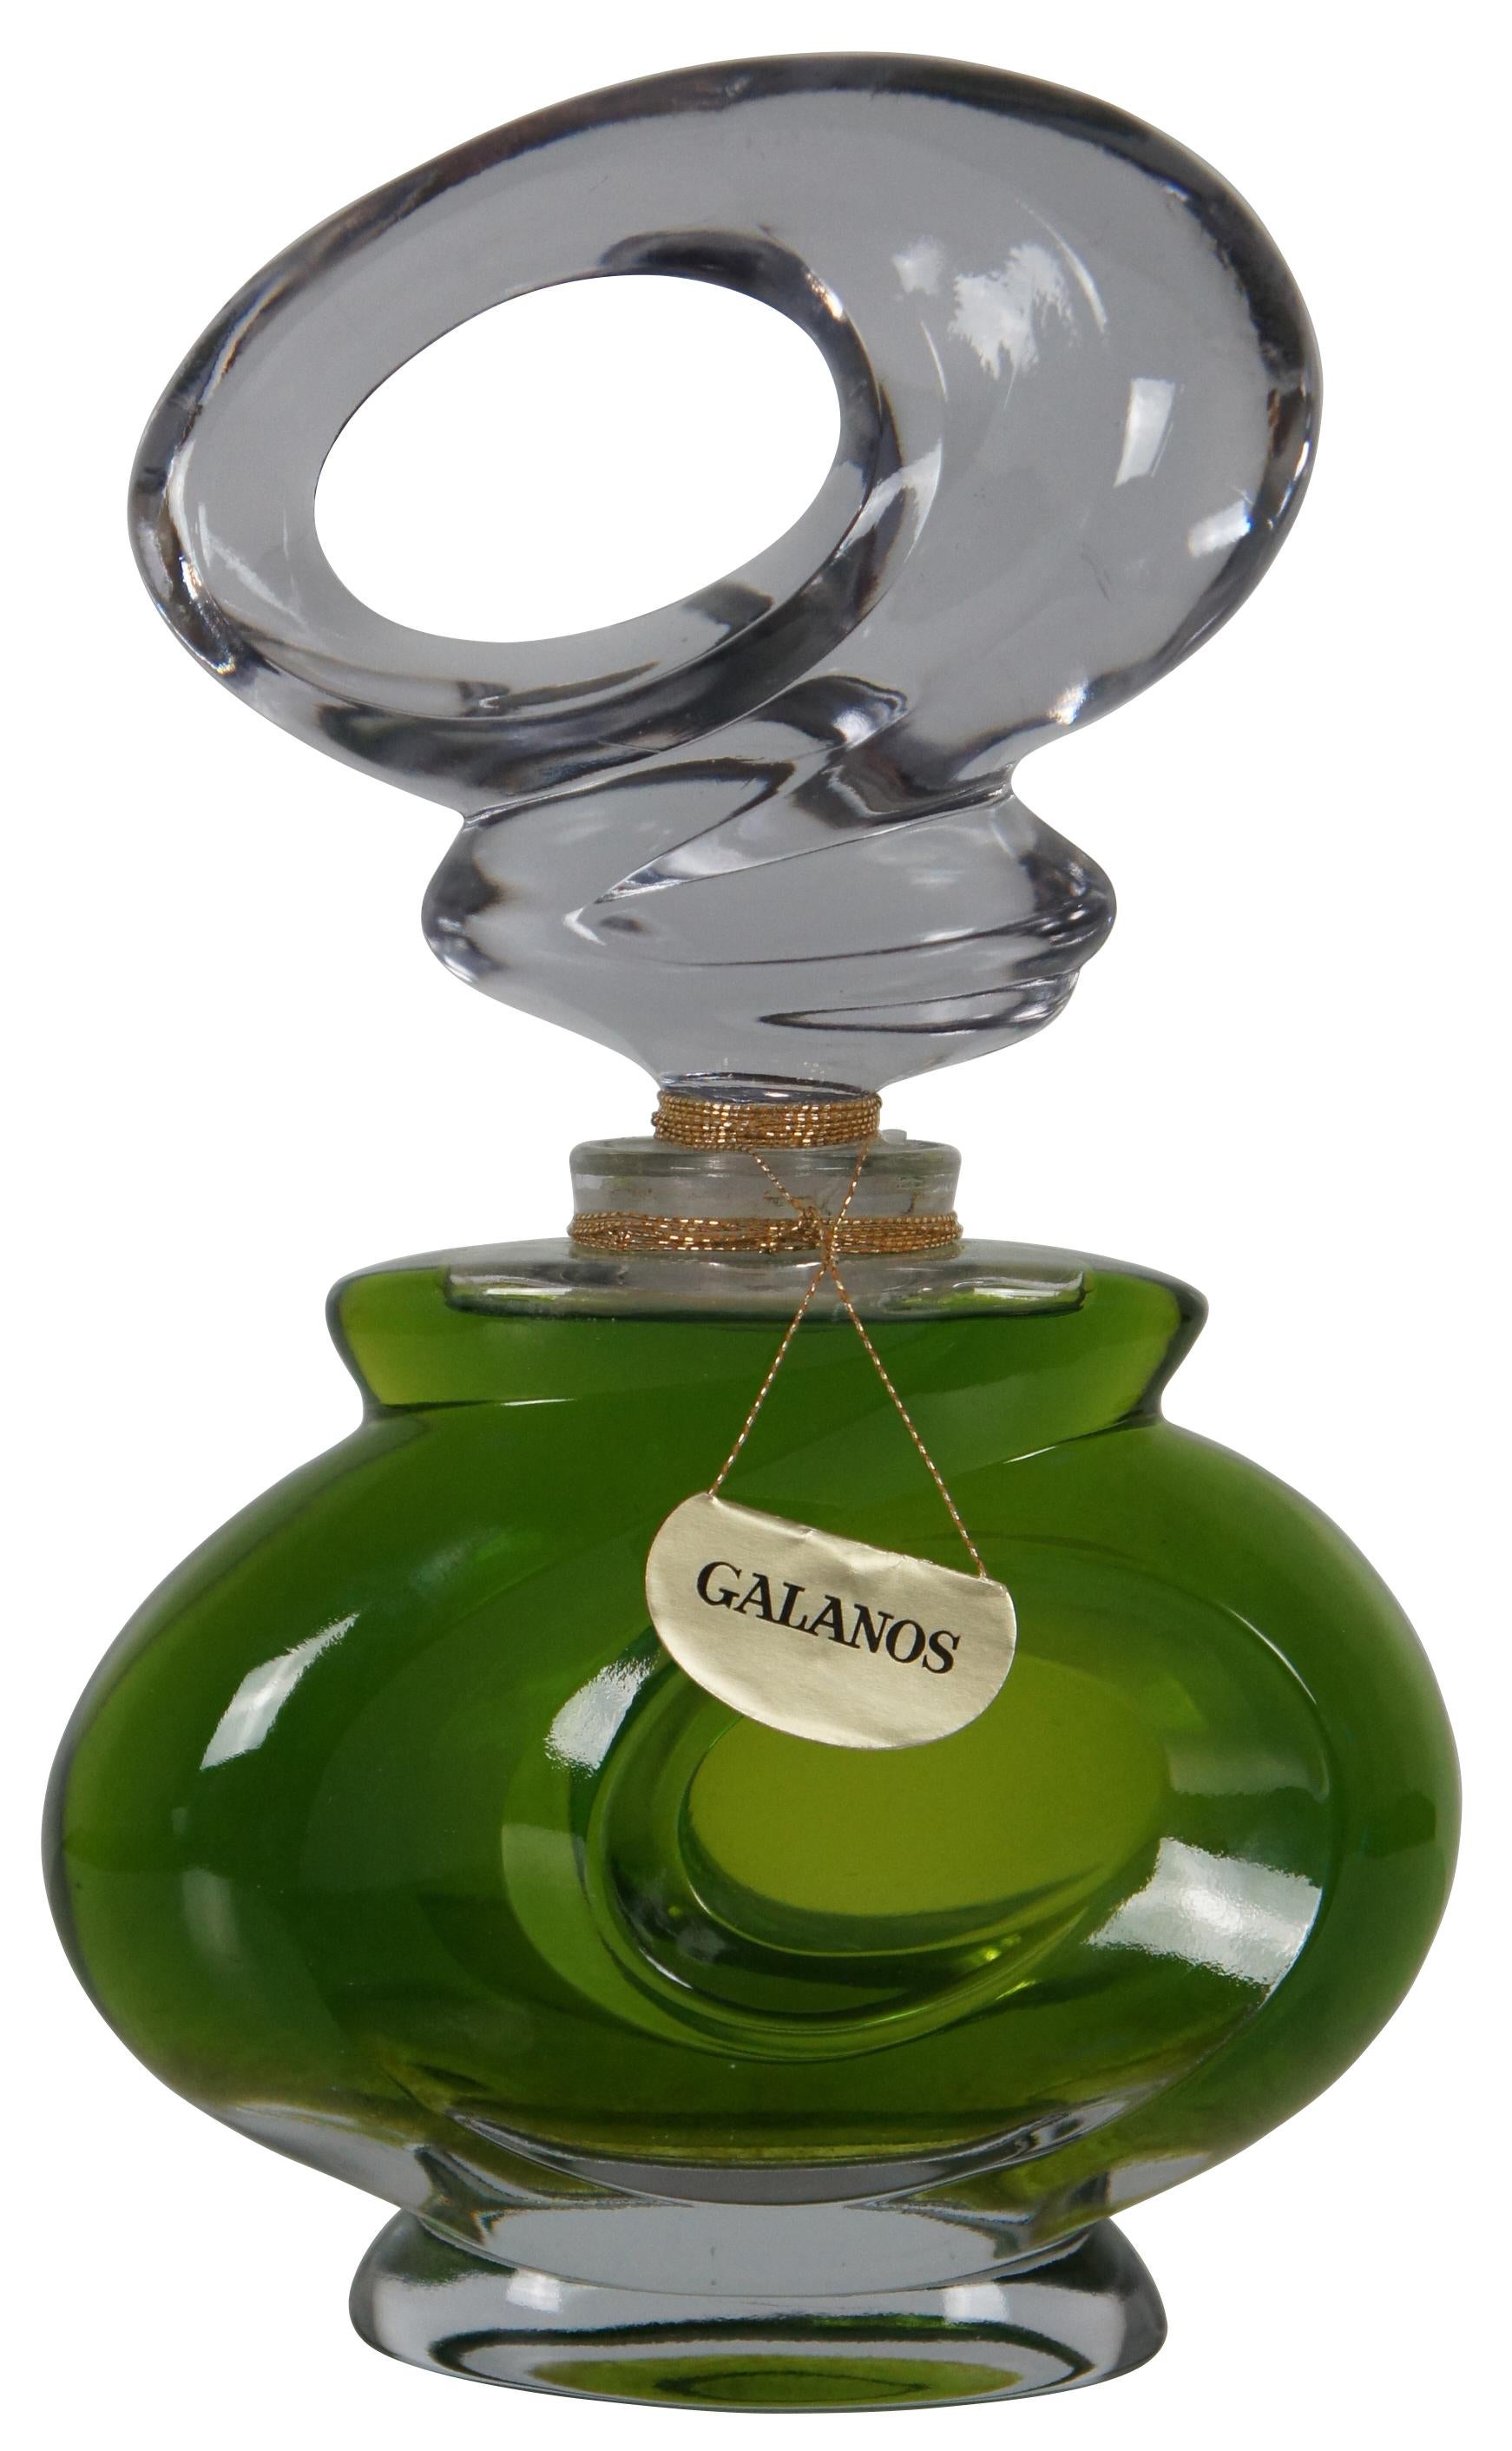 Vintage Galanos designer fragrance factice or dummy bottle with a swirling art nouveau glass design, originally part of a department store display. Measure: 12